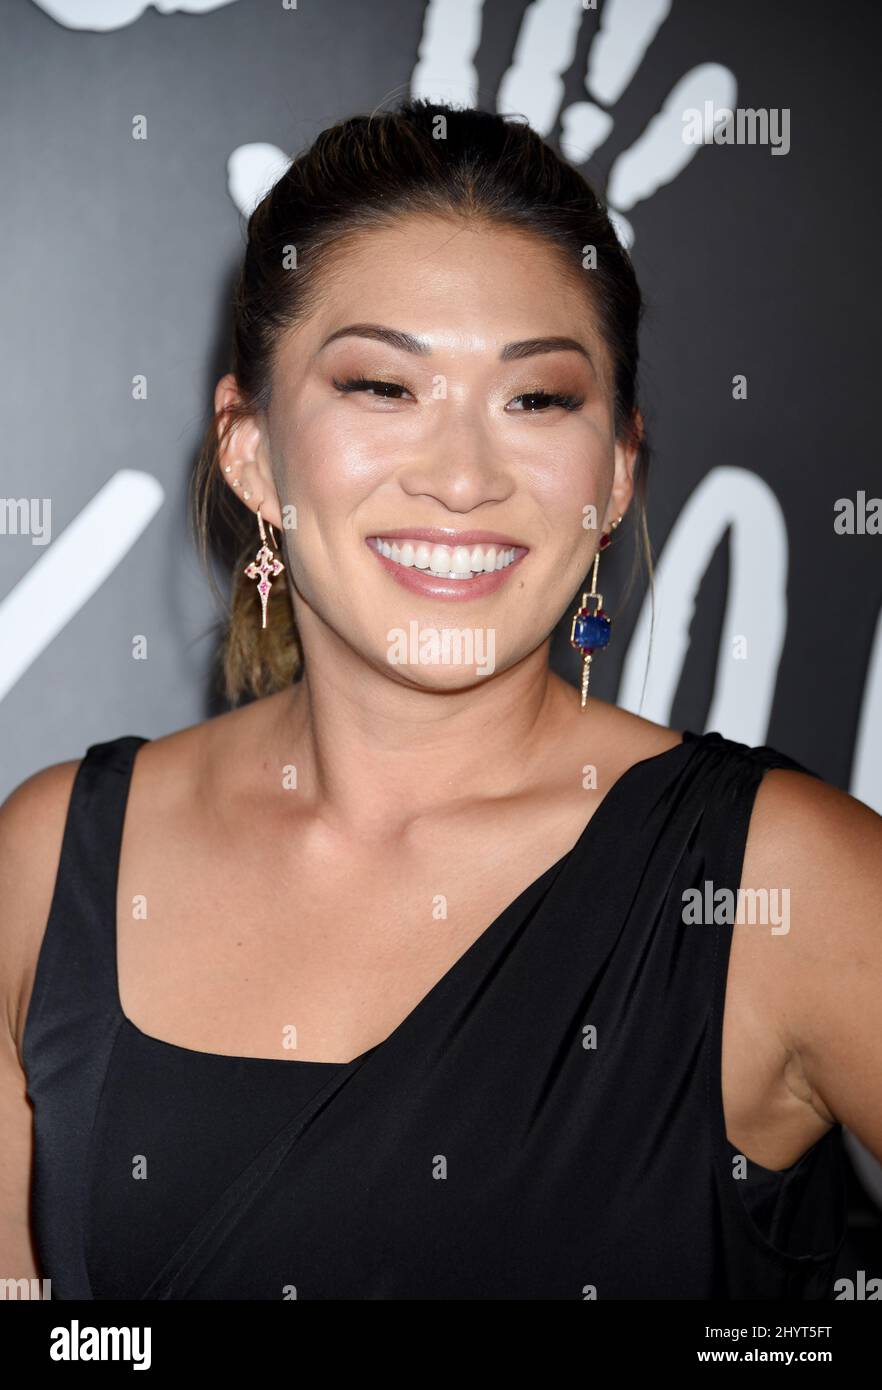 Jenna Ushkowitz at Adopttogether's Annual Baby Ball 2021 Gala held at NeueHouse Hollywood on October 2, 2021 in Hollywood, CA. Stock Photo